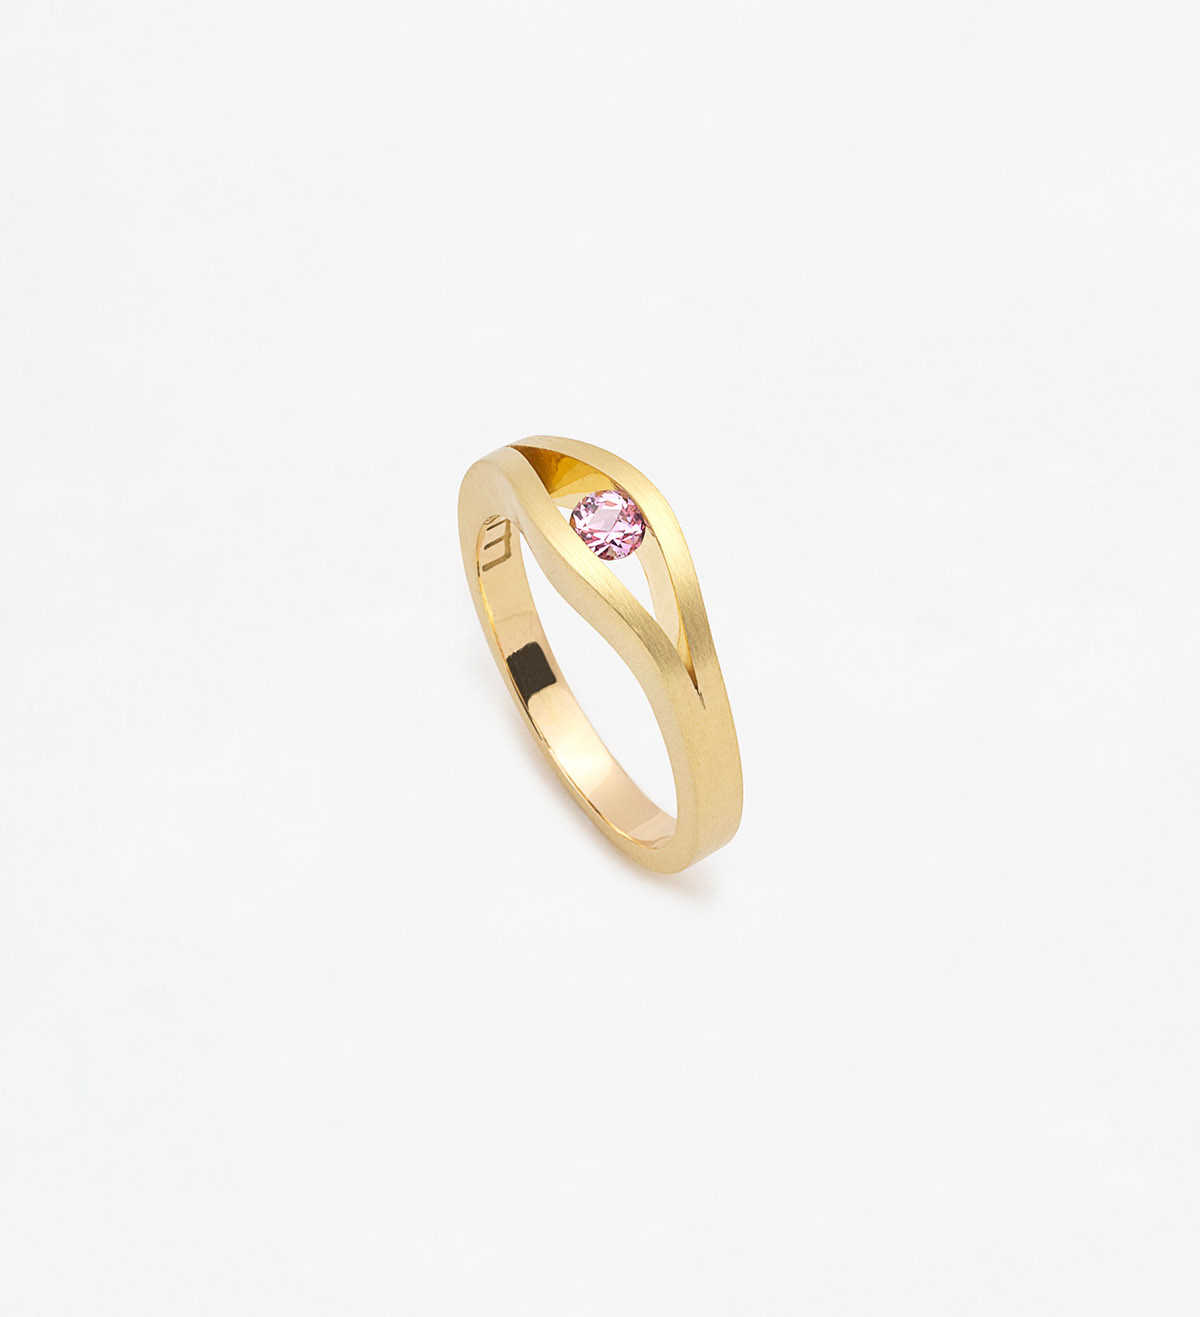 18k gold ring with rose Wennick-Lefèvre sapphire 0.21ct